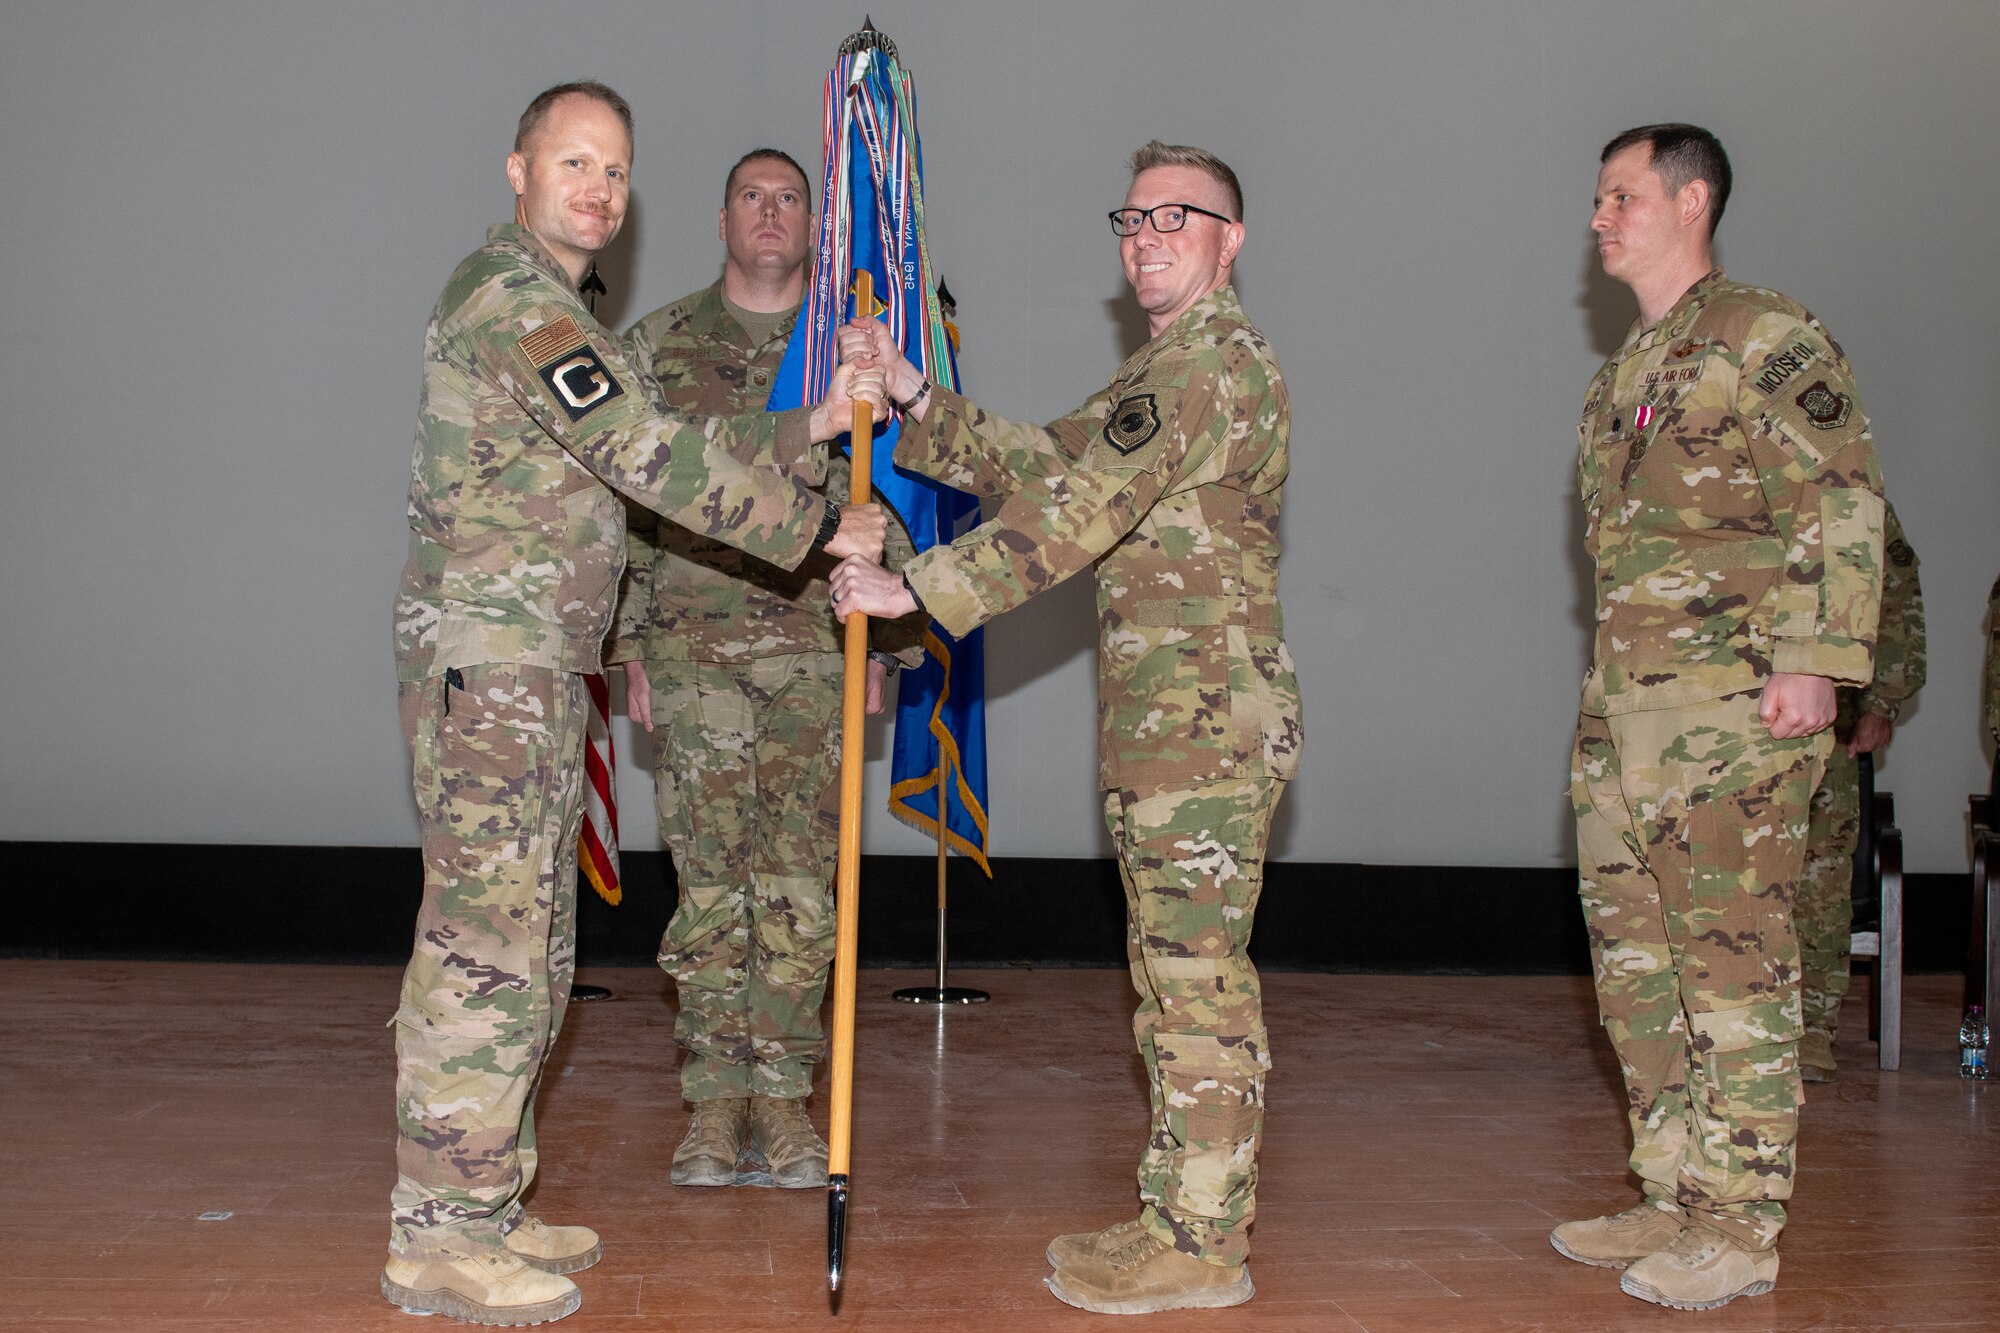 U.S. Air Force Lt. Col. Daniel Naske assumes command of the 816th Expeditionary Airlift Squadron during a change of command ceremony on Al Udeid Air Base, Qatar, May 2, 2022. Naske has over 2,700 flying hours.